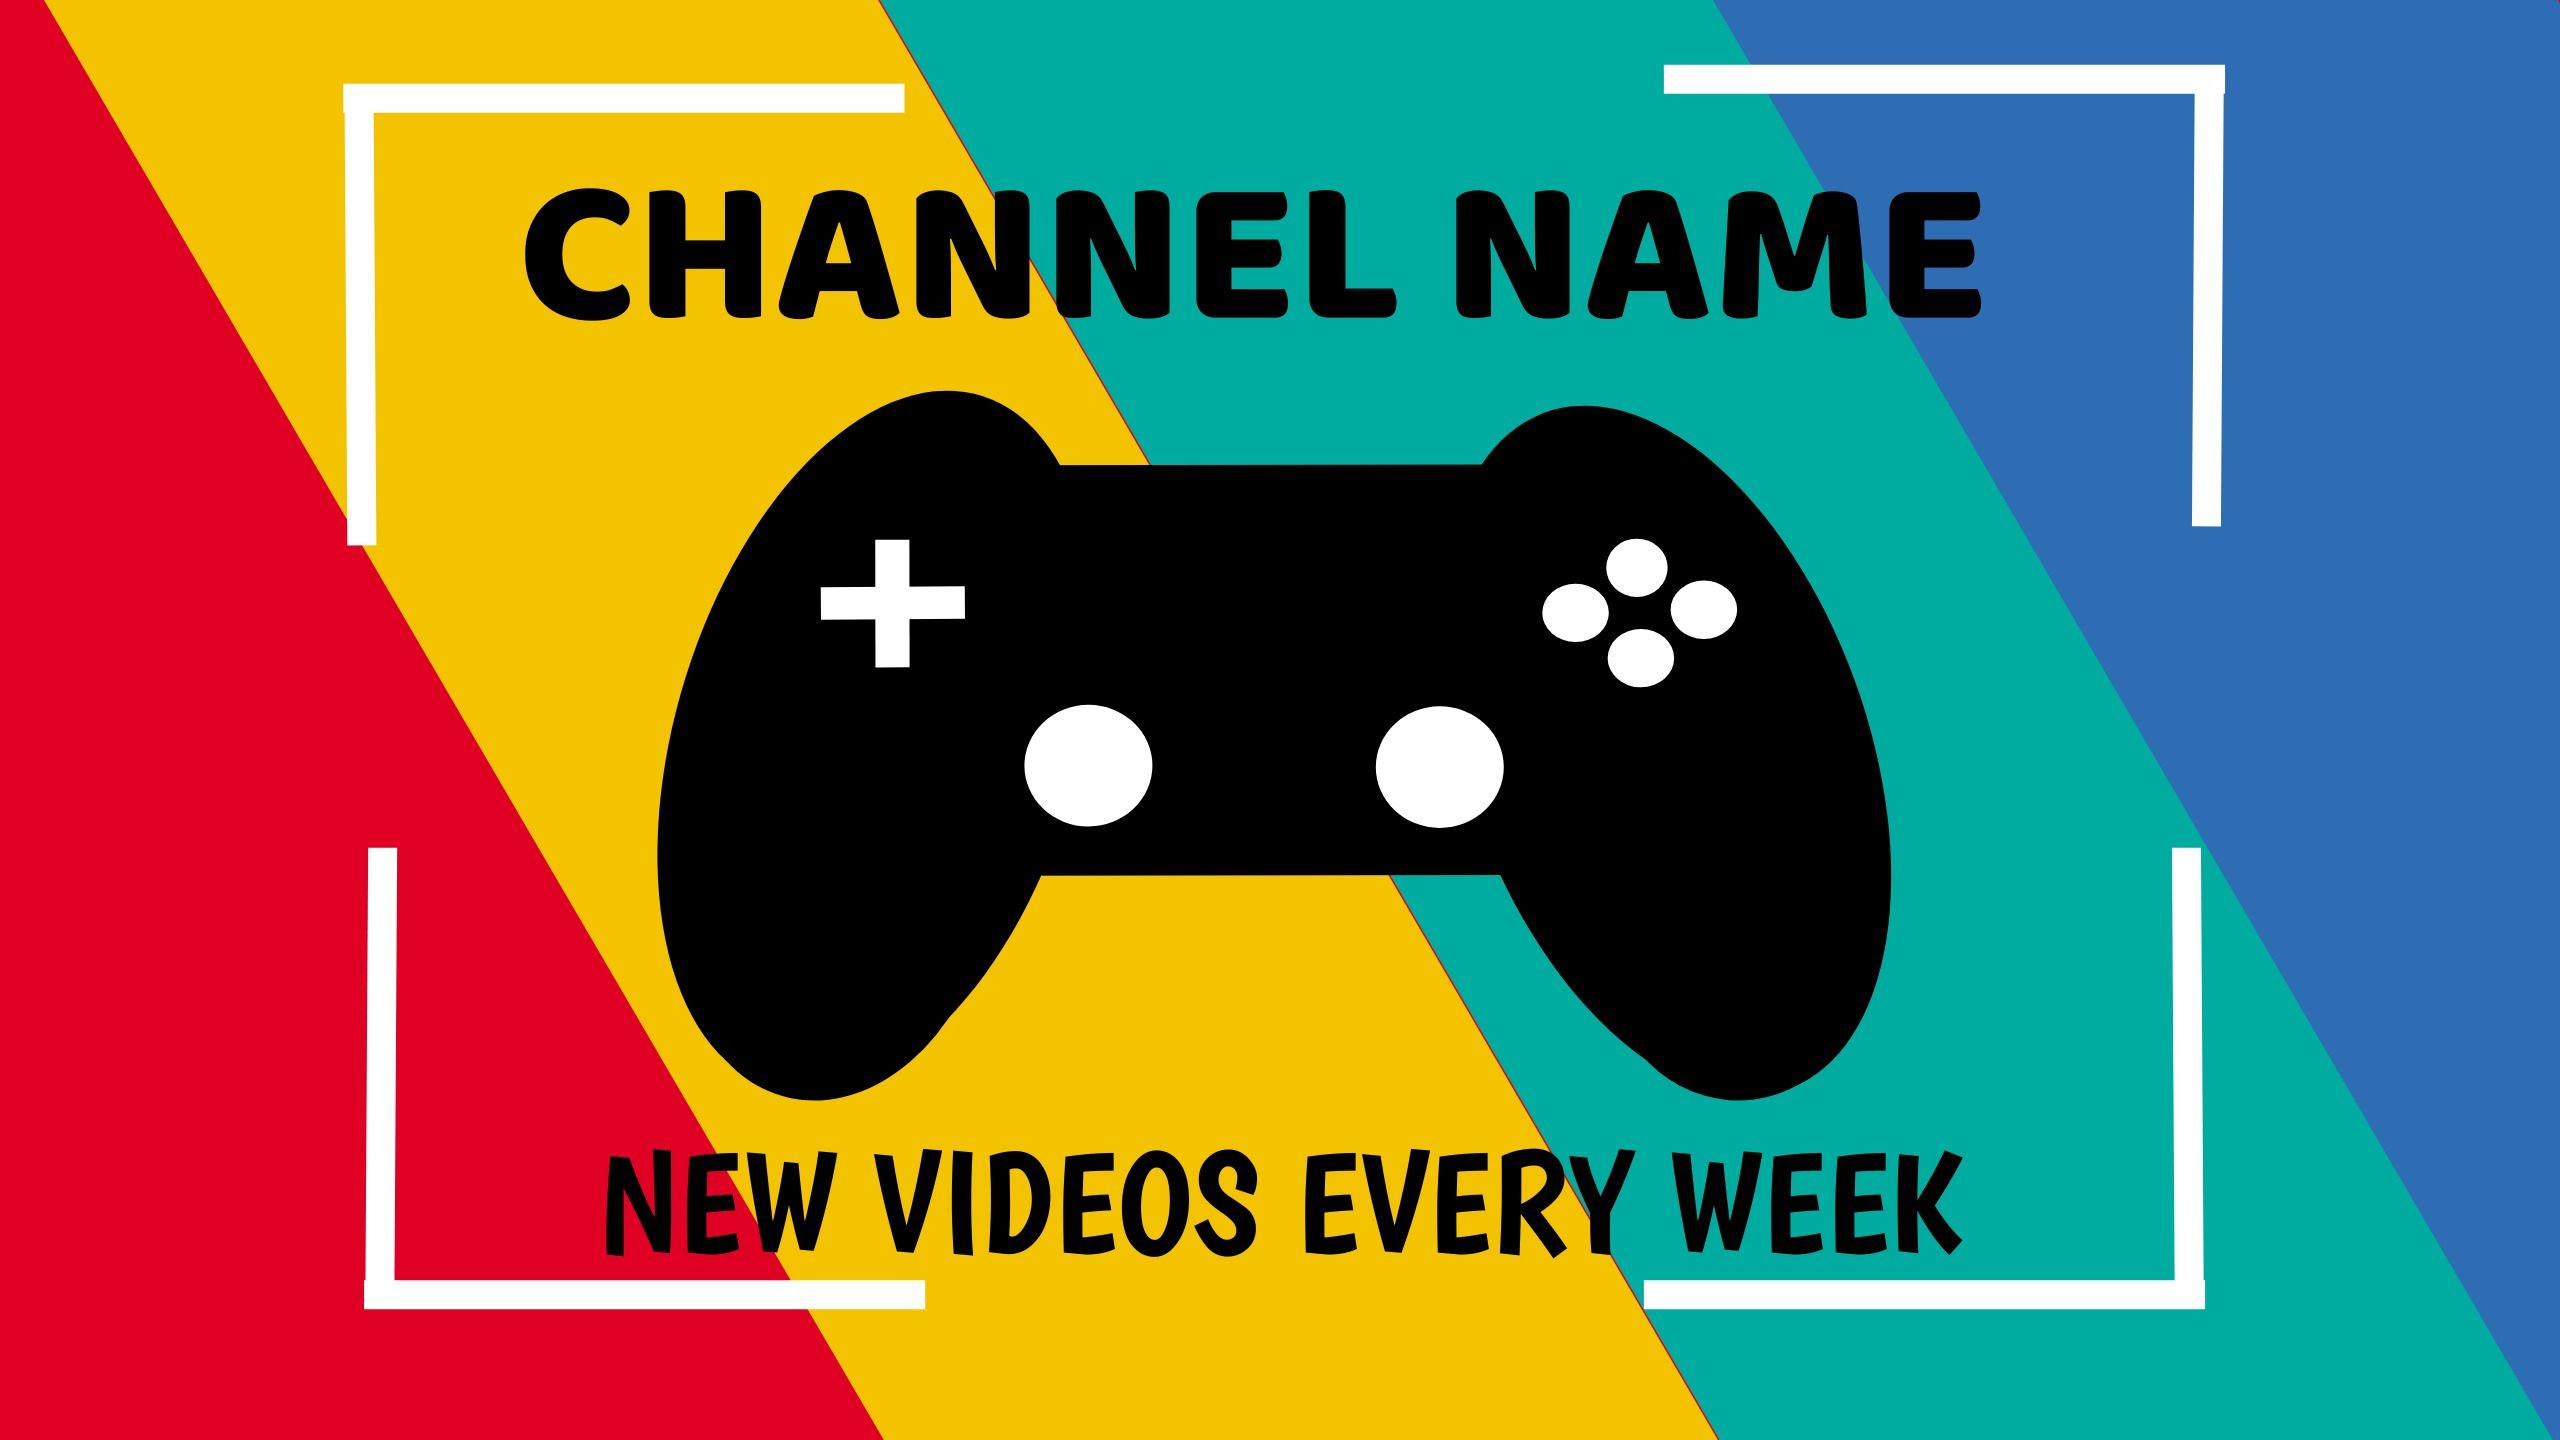 Colorful YouTube Banner template design with text reading 'New videos every week' and a console icon in the center - 36 creative YouTube banner ideas and examples to boost your inspiration - Image